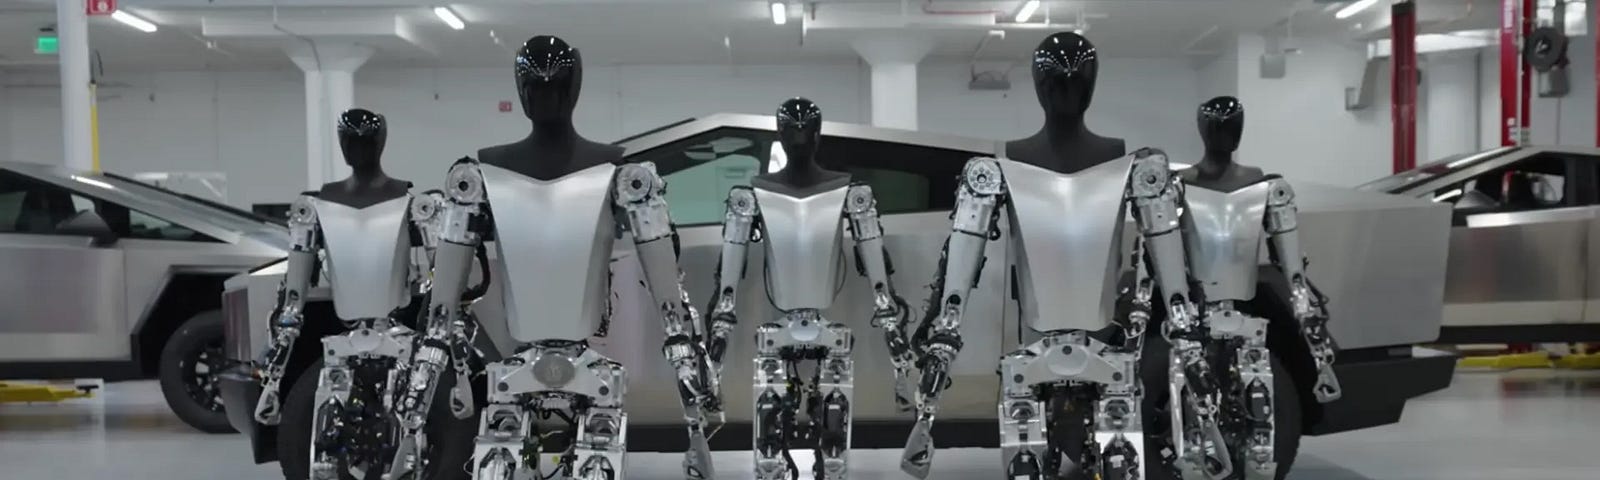 IMAGE: Five Optimus robots in front of a Tesla Cybertruck